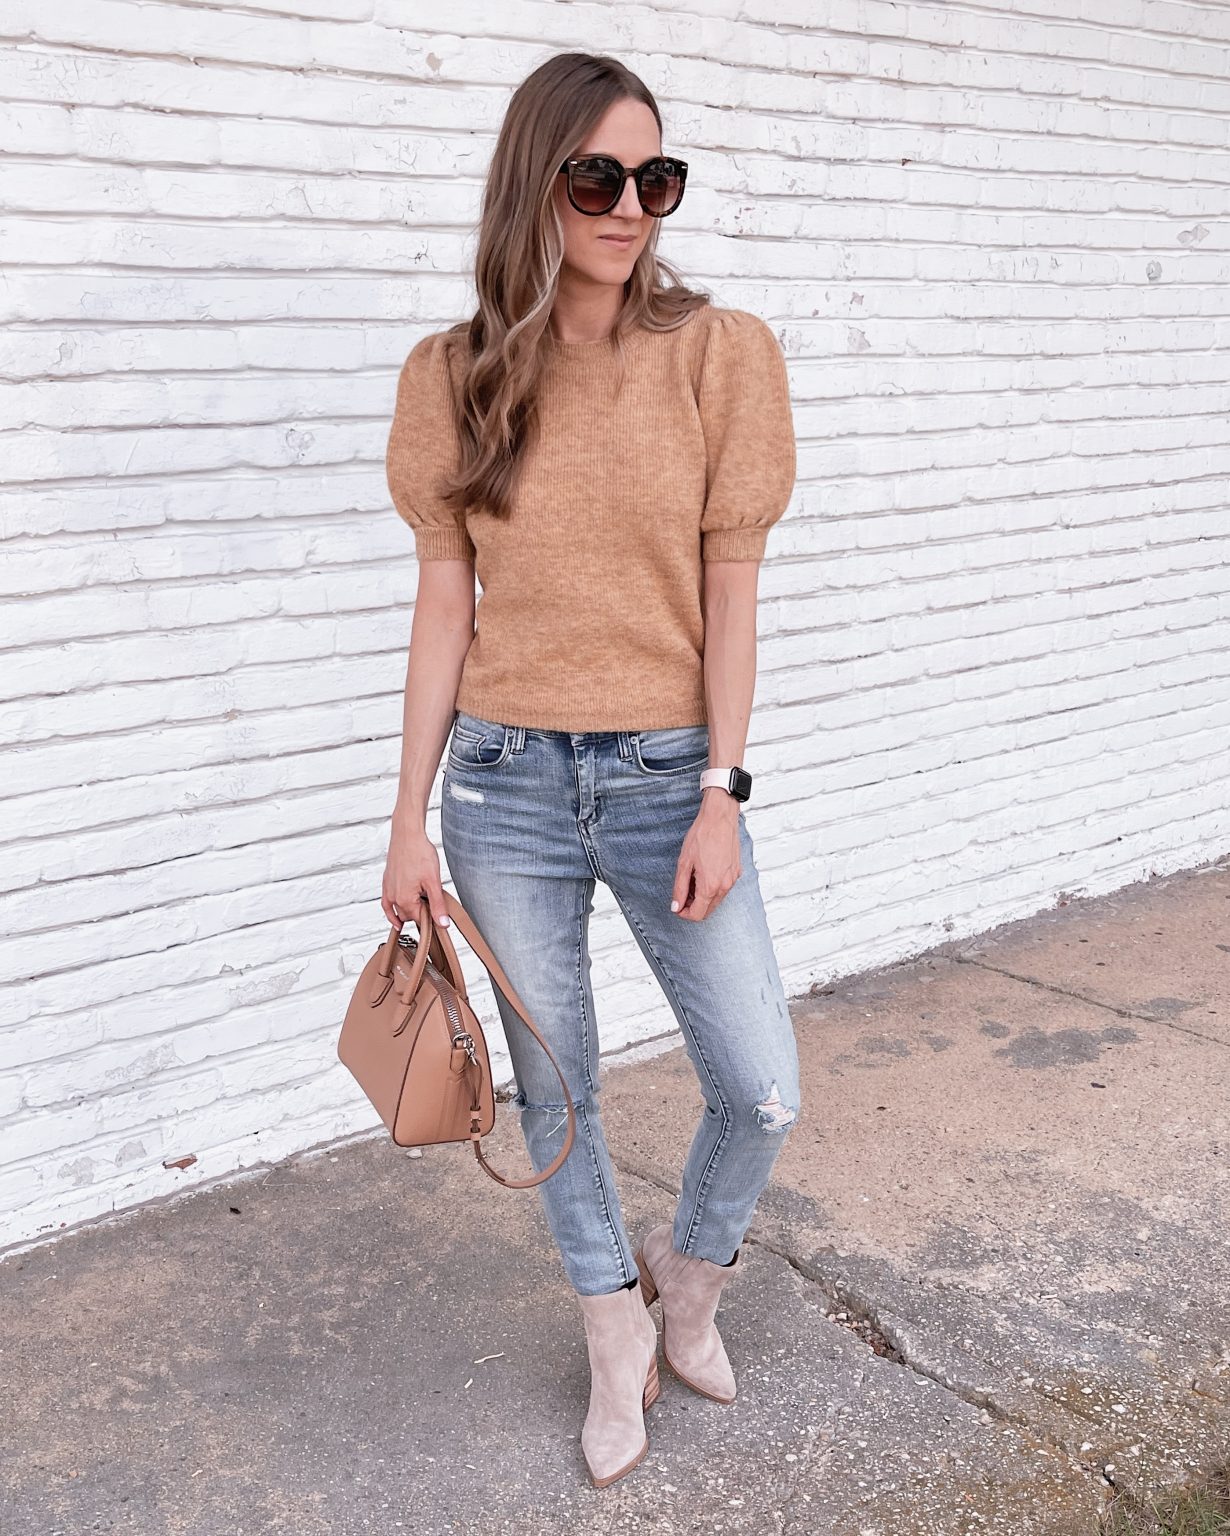 A Top for Fall Transition - Sunsets and Stilettos